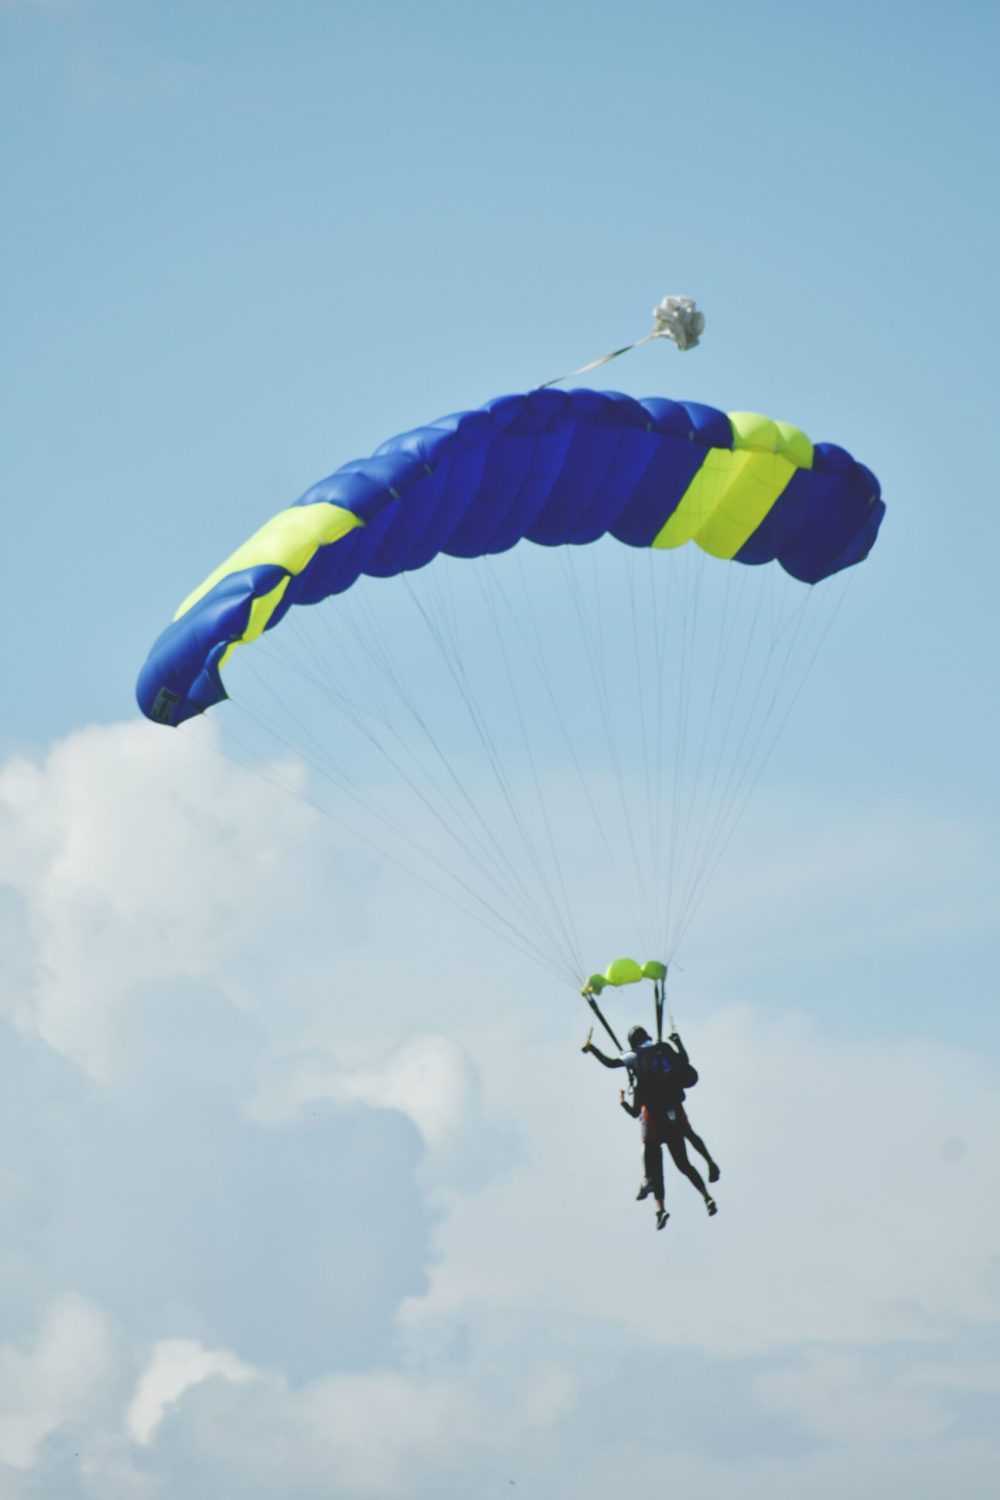 Paragliding from Taghazout (Parachuting)